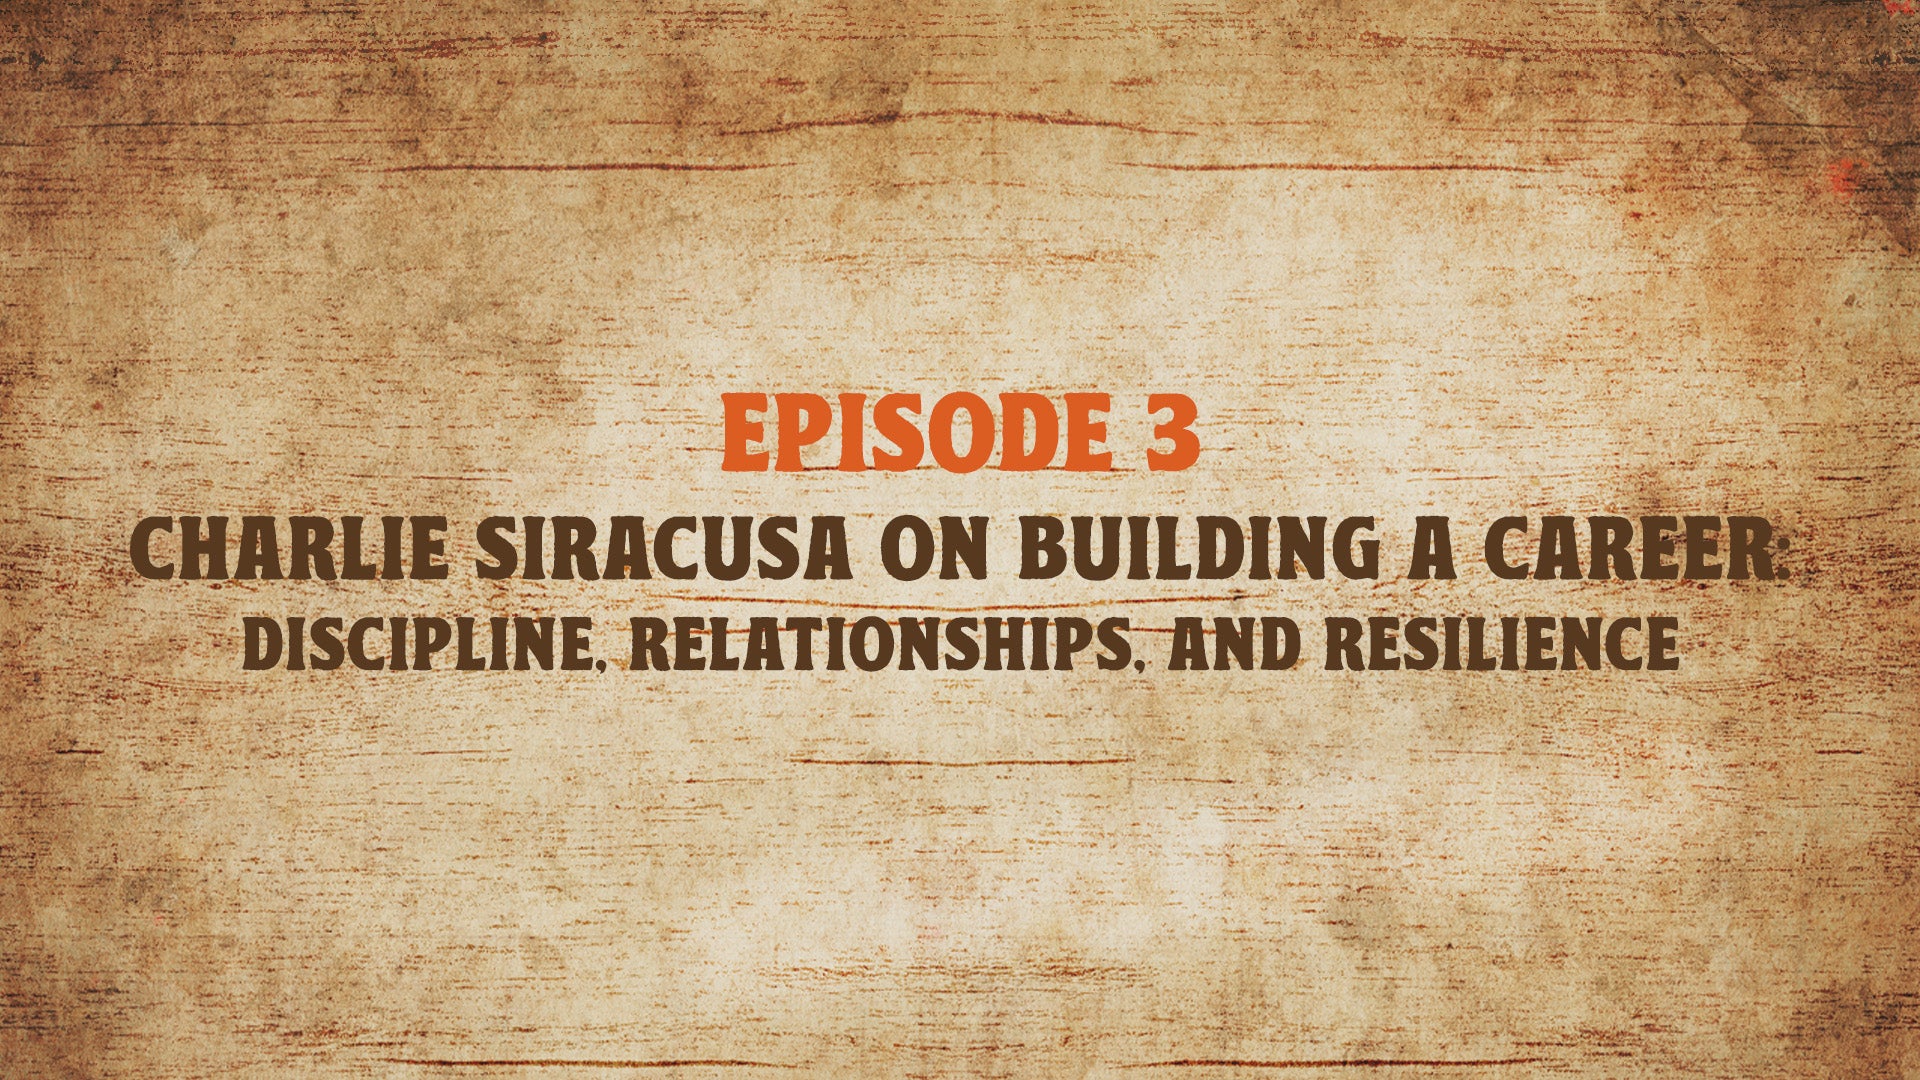 Episode 3 - Charlie Siracusa on Building a Career: Discipline, Relationships, and Resilience